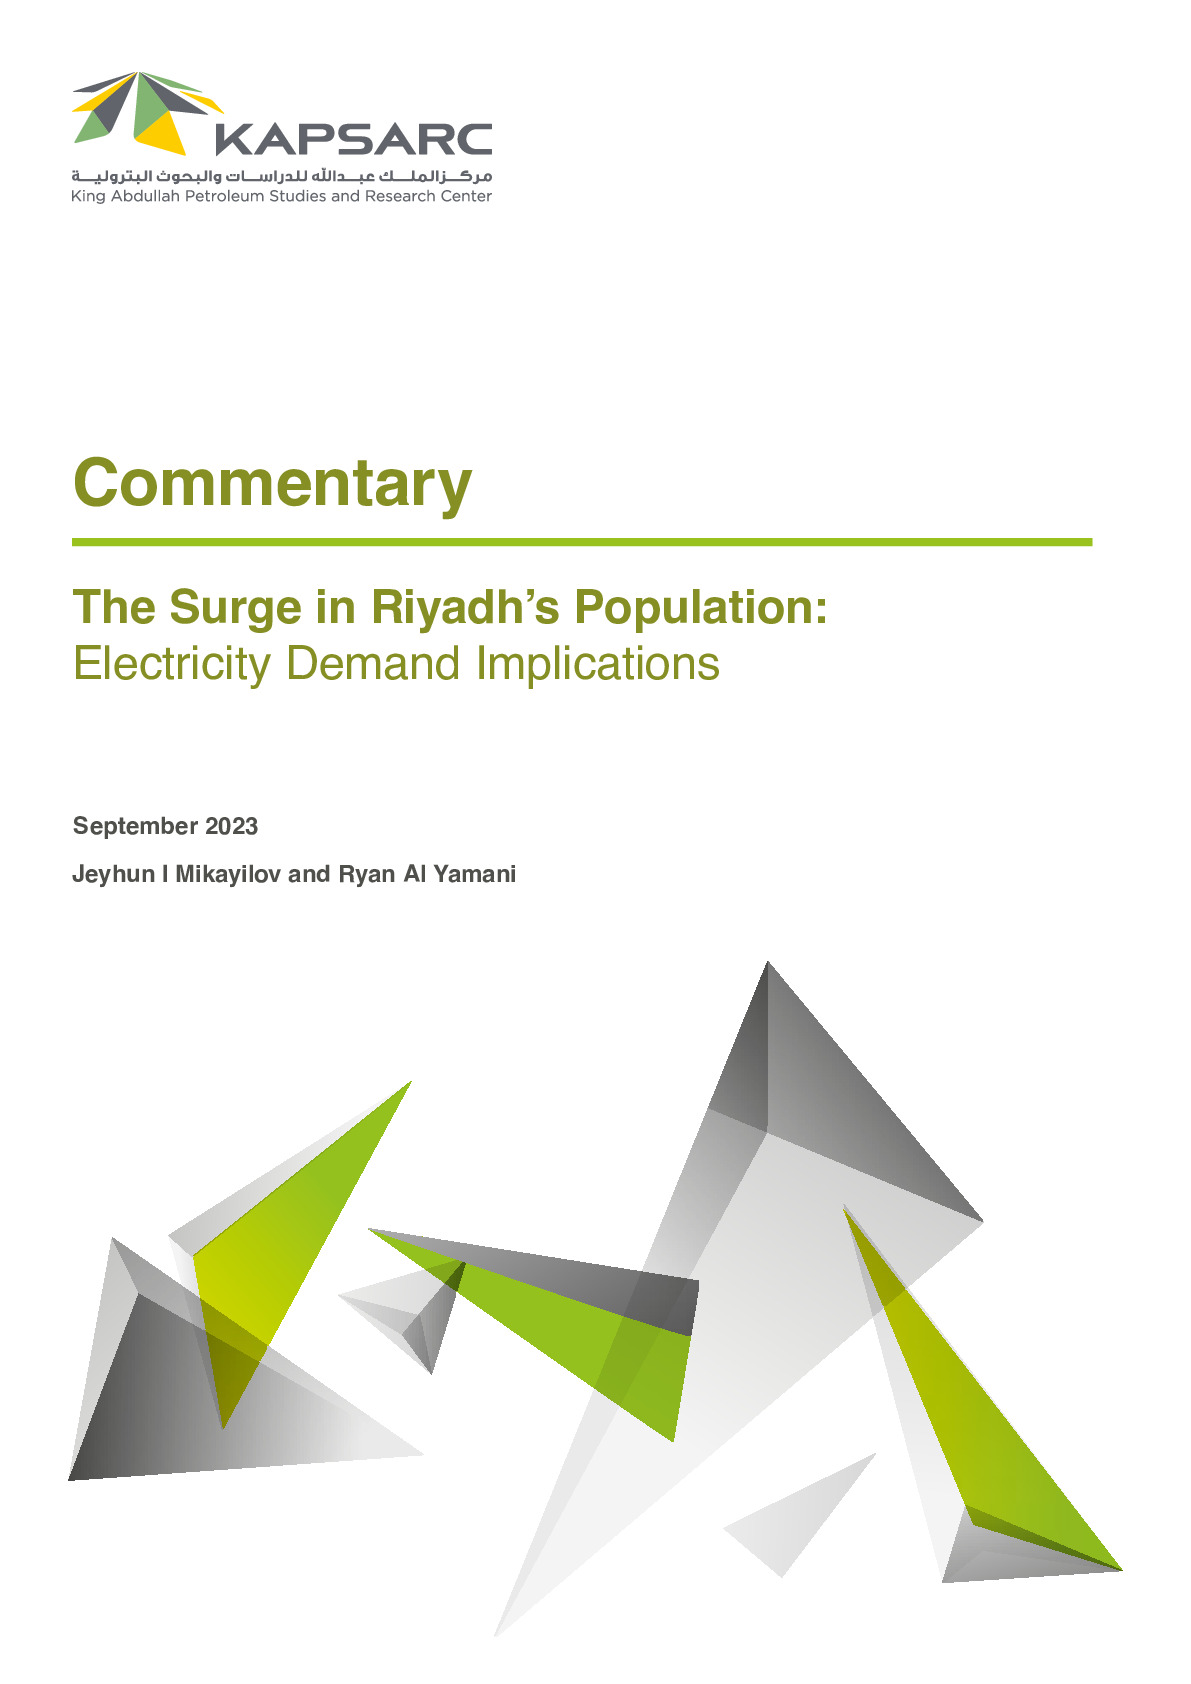 The Surge in Riyadh’s Population: Electricity Demand Implications